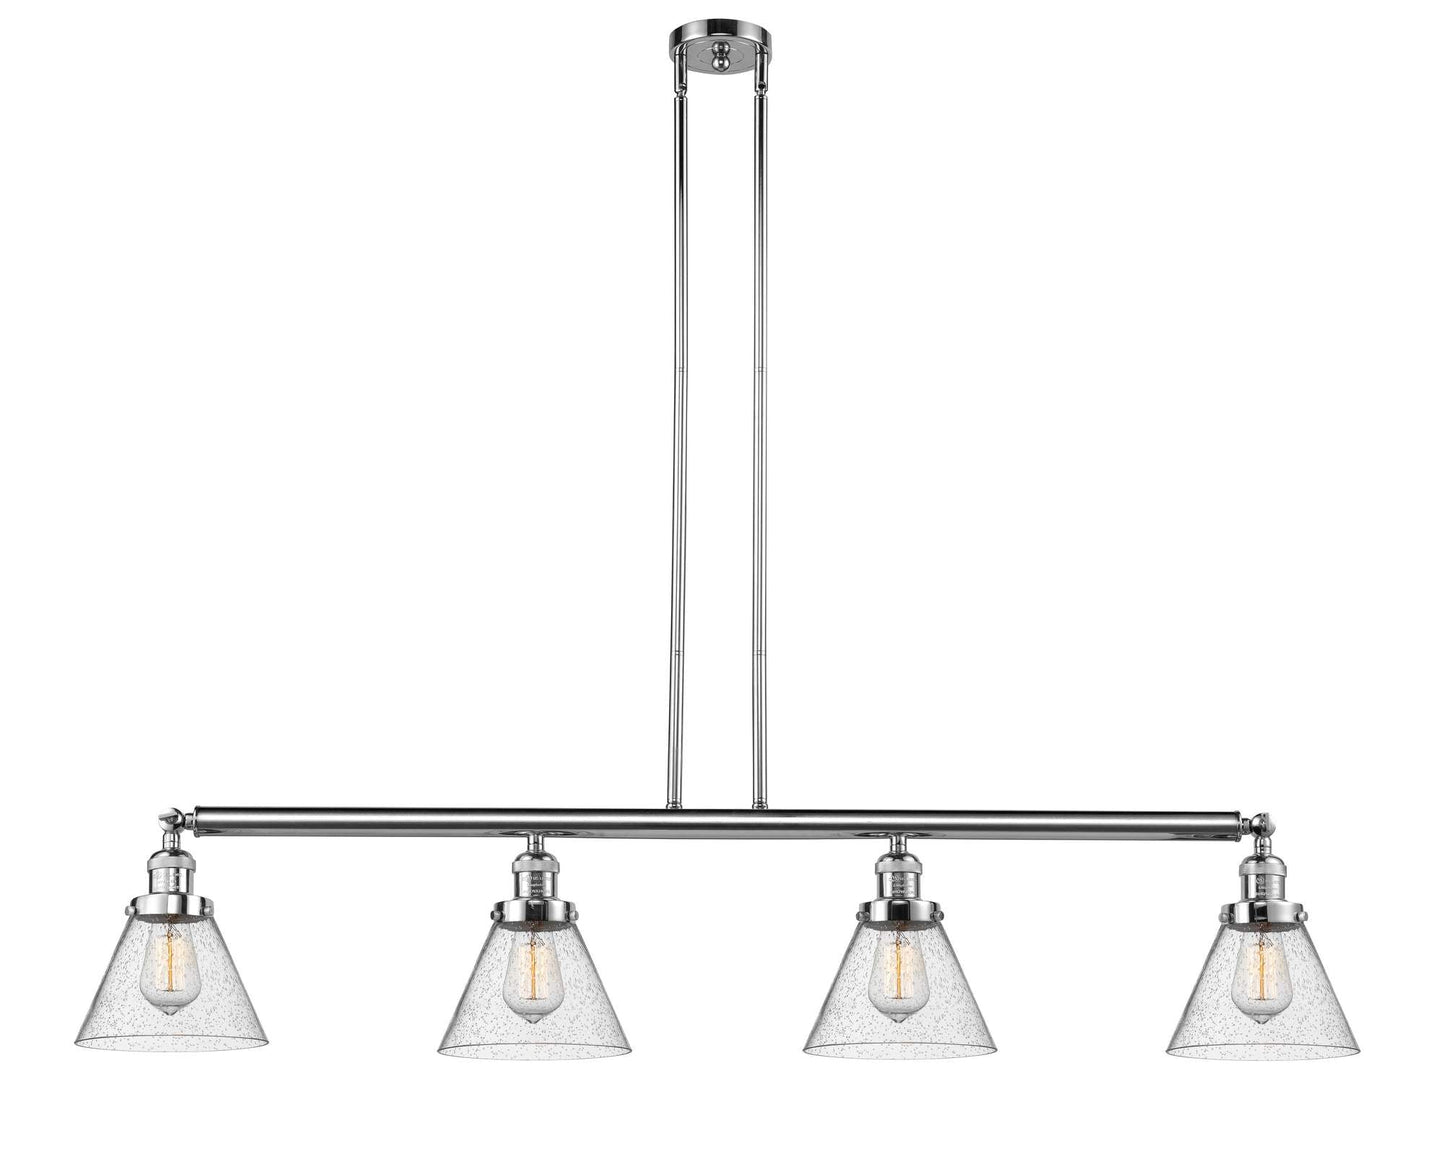 214-PC-G44 4-Light 52.375" Polished Chrome Island Light - Seedy Large Cone Glass - LED Bulb - Dimmensions: 52.375 x 7.75 x 10<br>Minimum Height : 20.25<br>Maximum Height : 44.25 - Sloped Ceiling Compatible: Yes